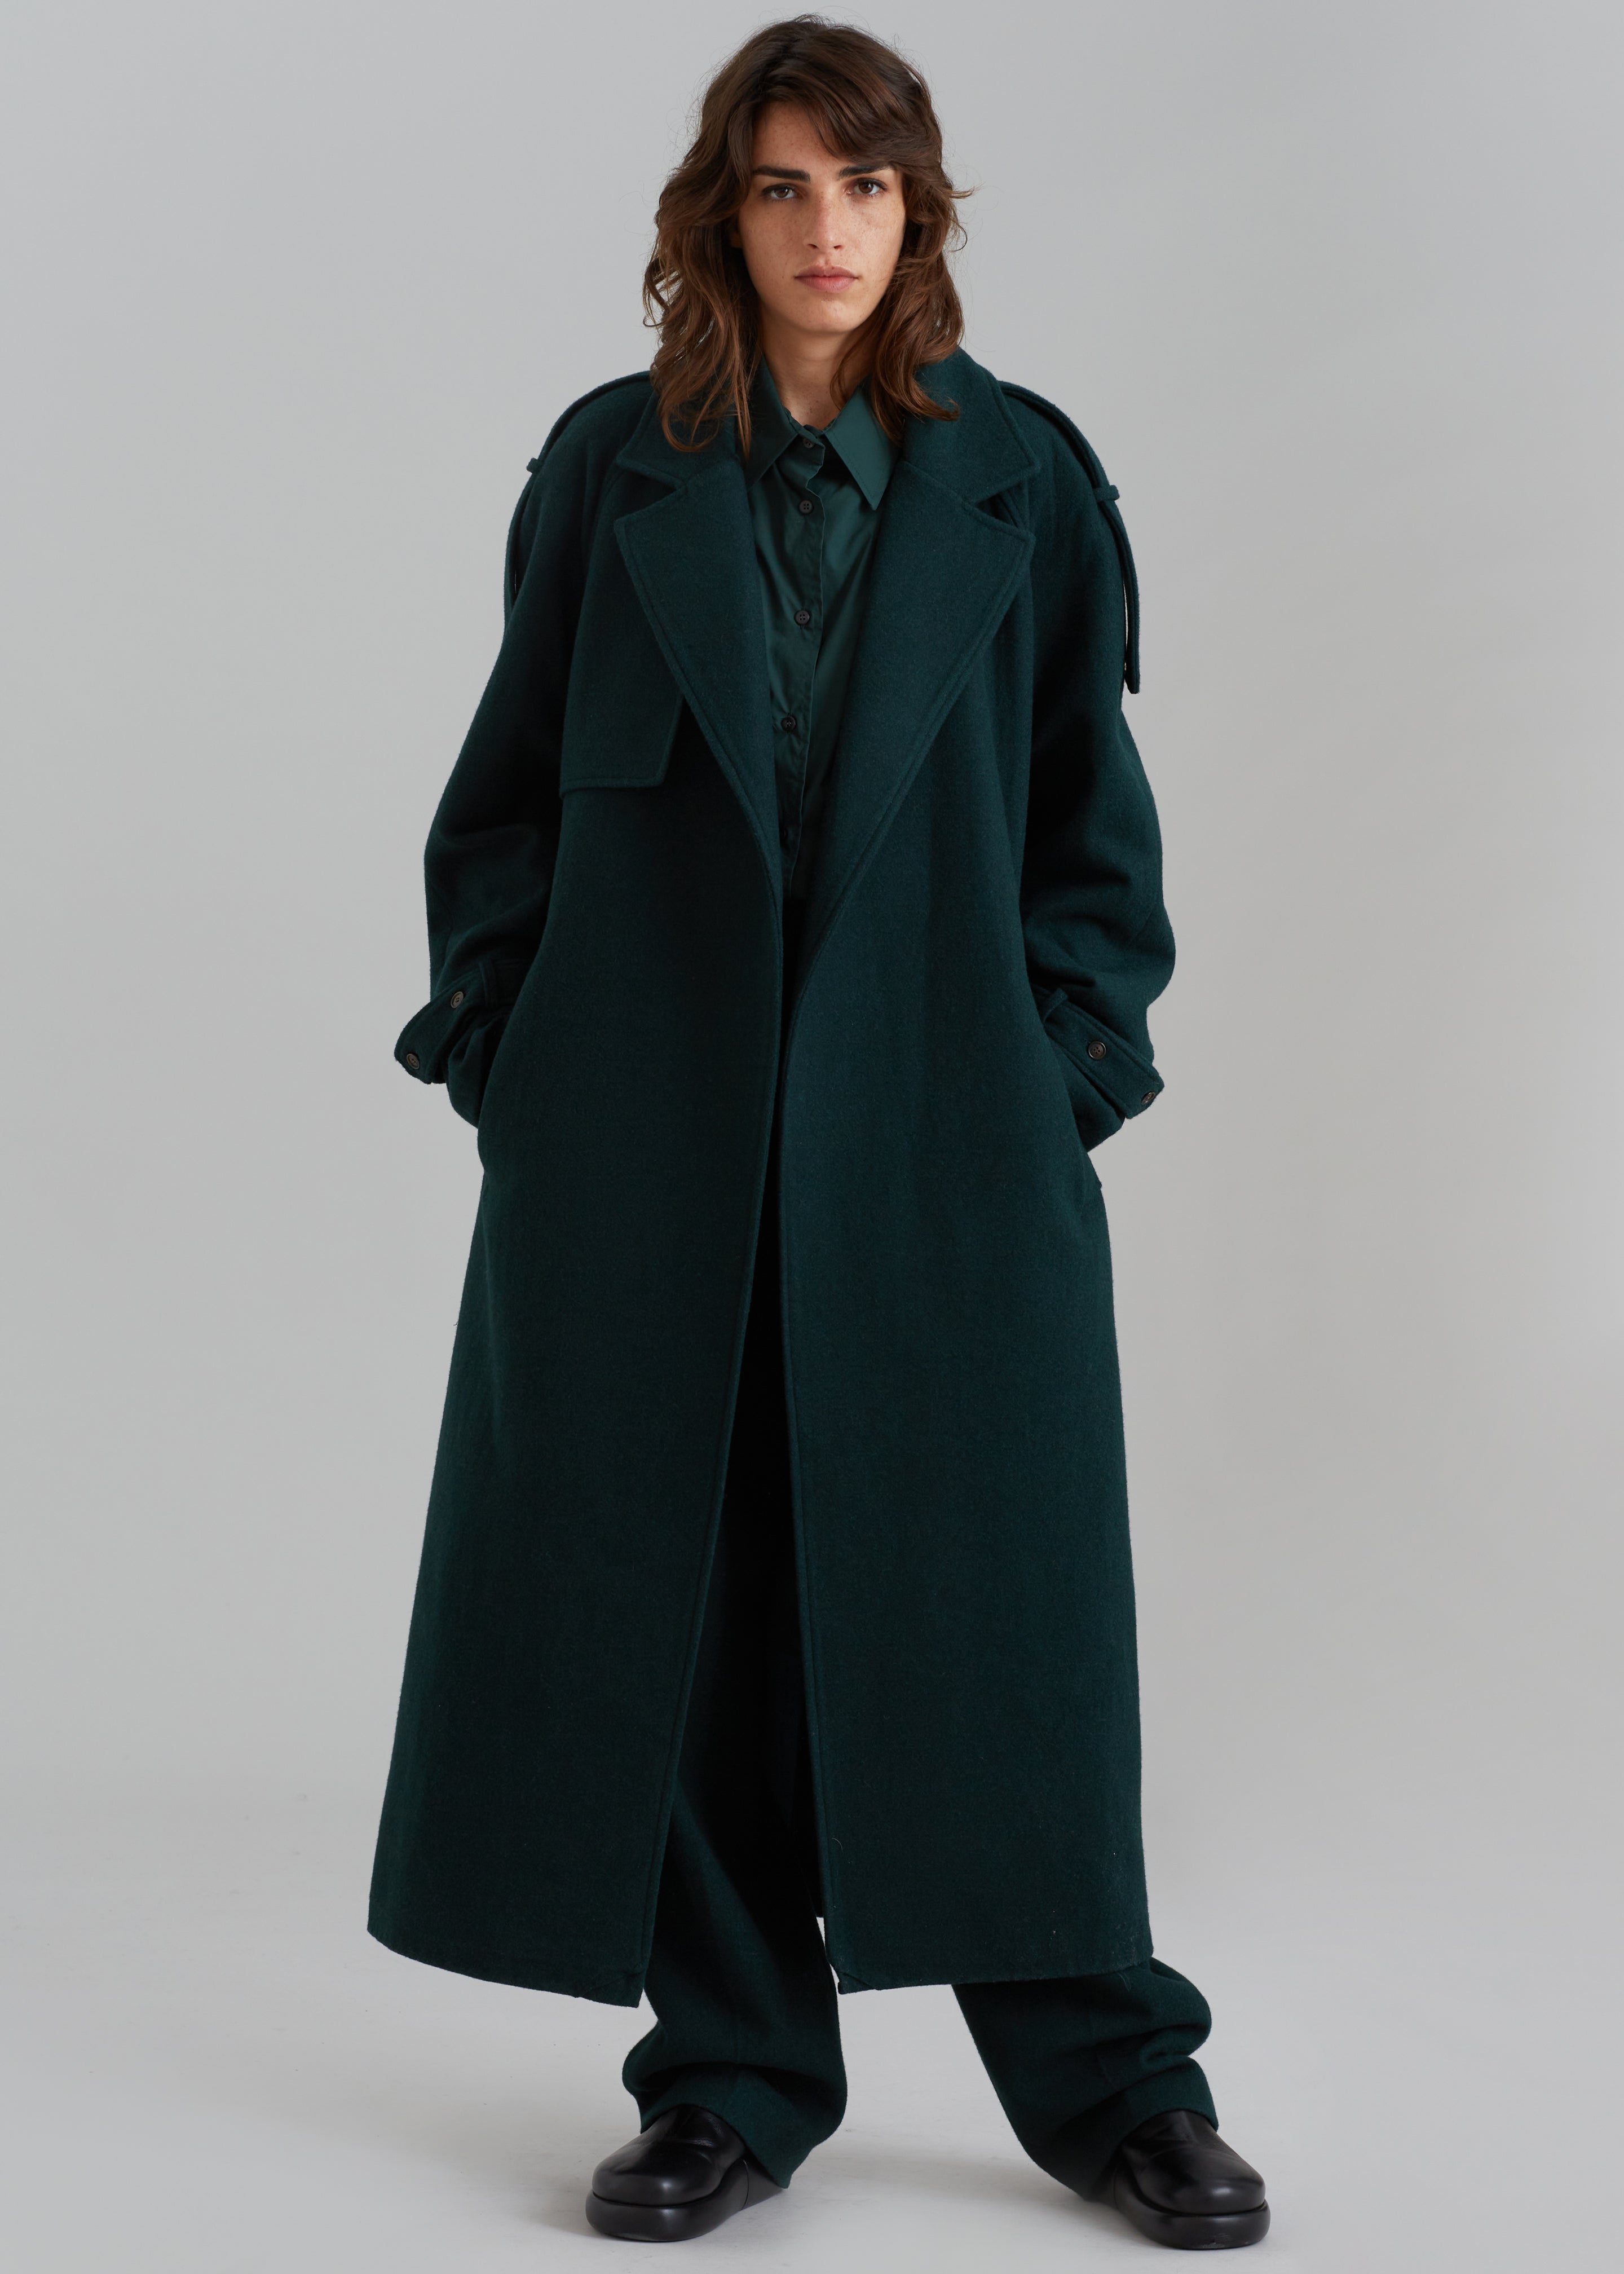 Suzanne Wool Trench Coat - Bottle Green - 10